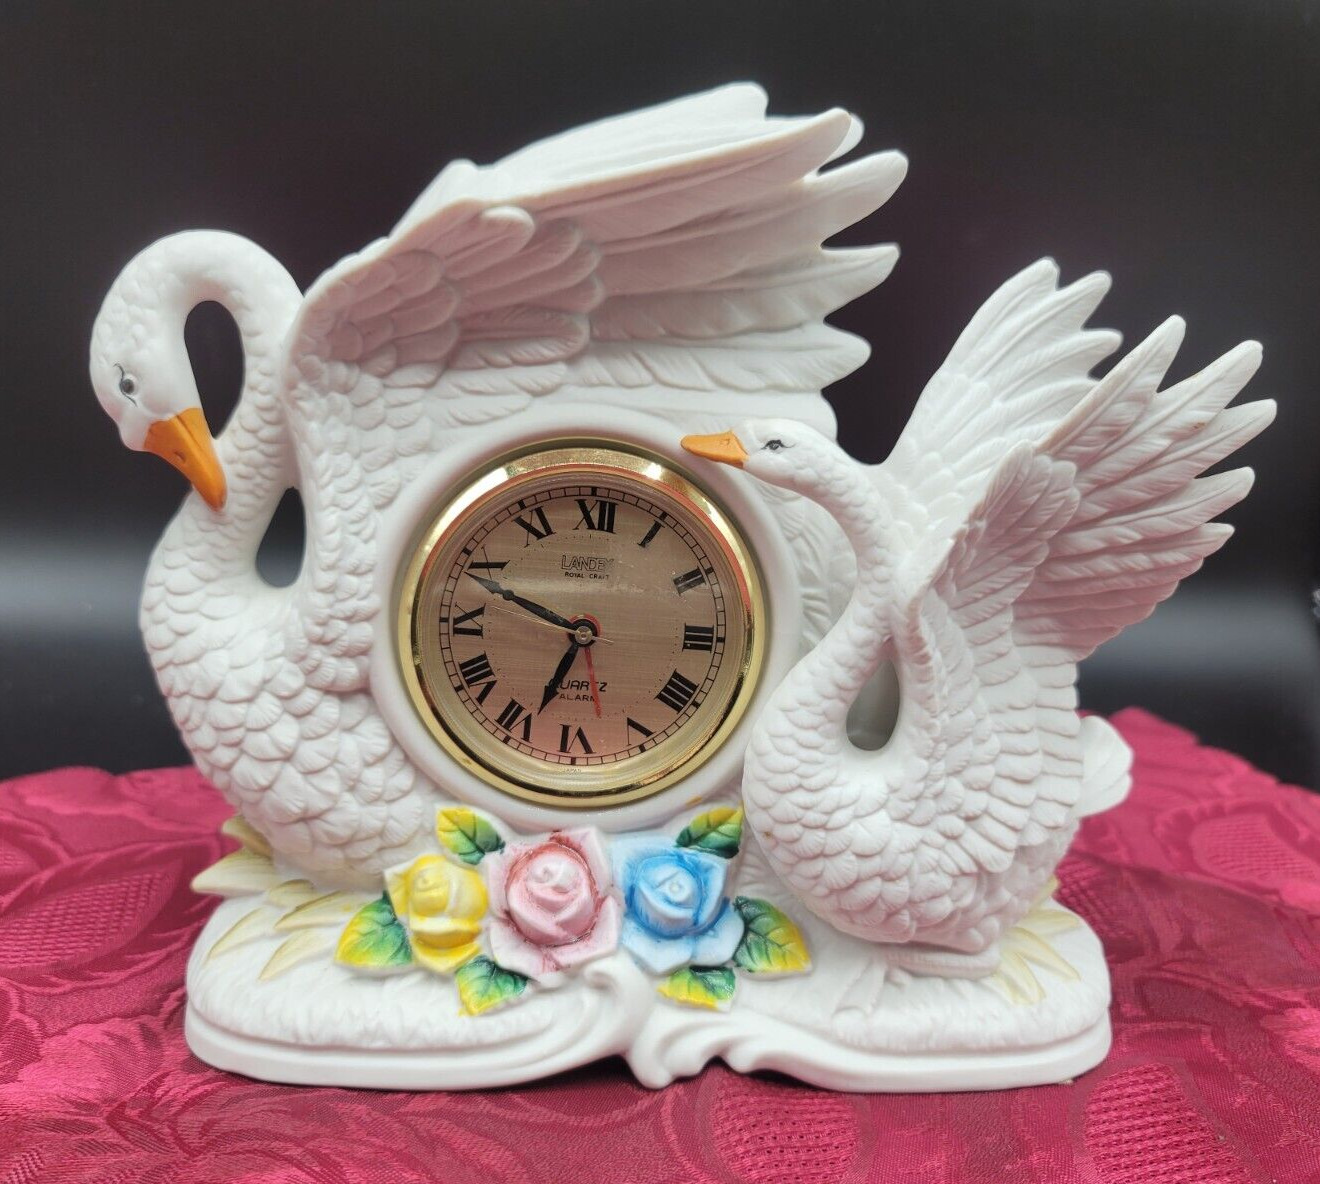 Vintage Landex Mantle Clock Porcelain 2 Swan (not working) Figurines are Perfect